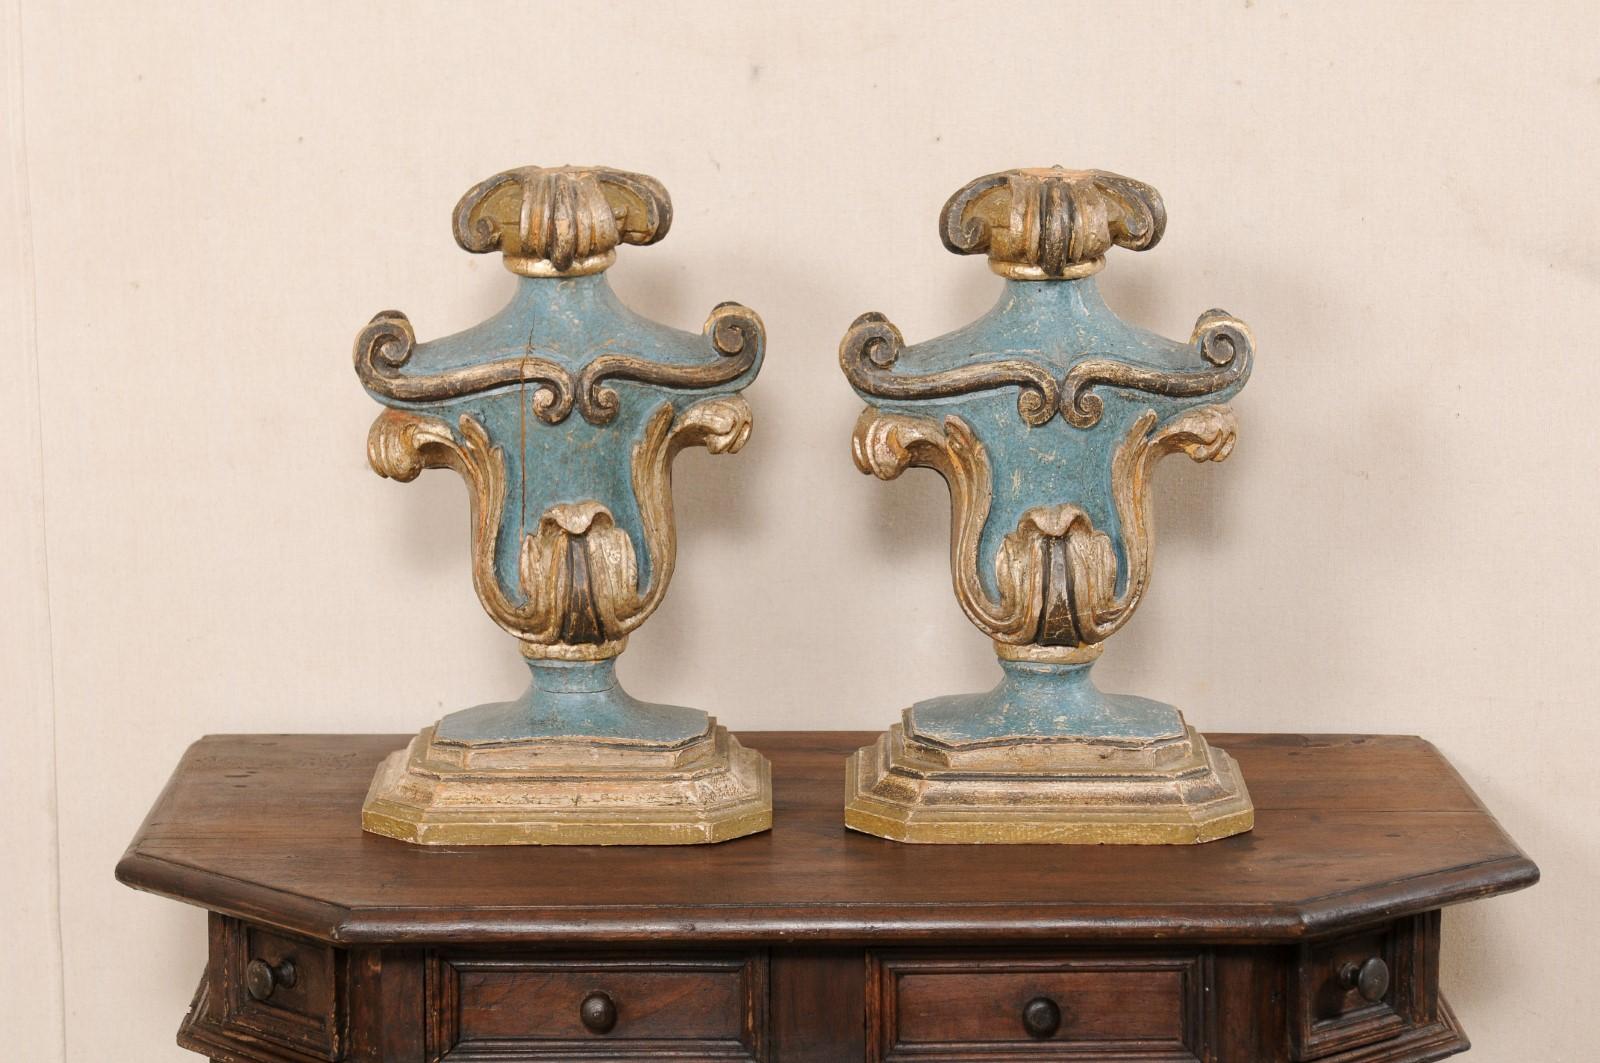 An Italian pair of carved and painted wood fragments. This vintage pair of table top decorations from Italy once had prickets and were used as candle sticks, but now repurposed as great decorative accessories. The fragments each have an urn shaped